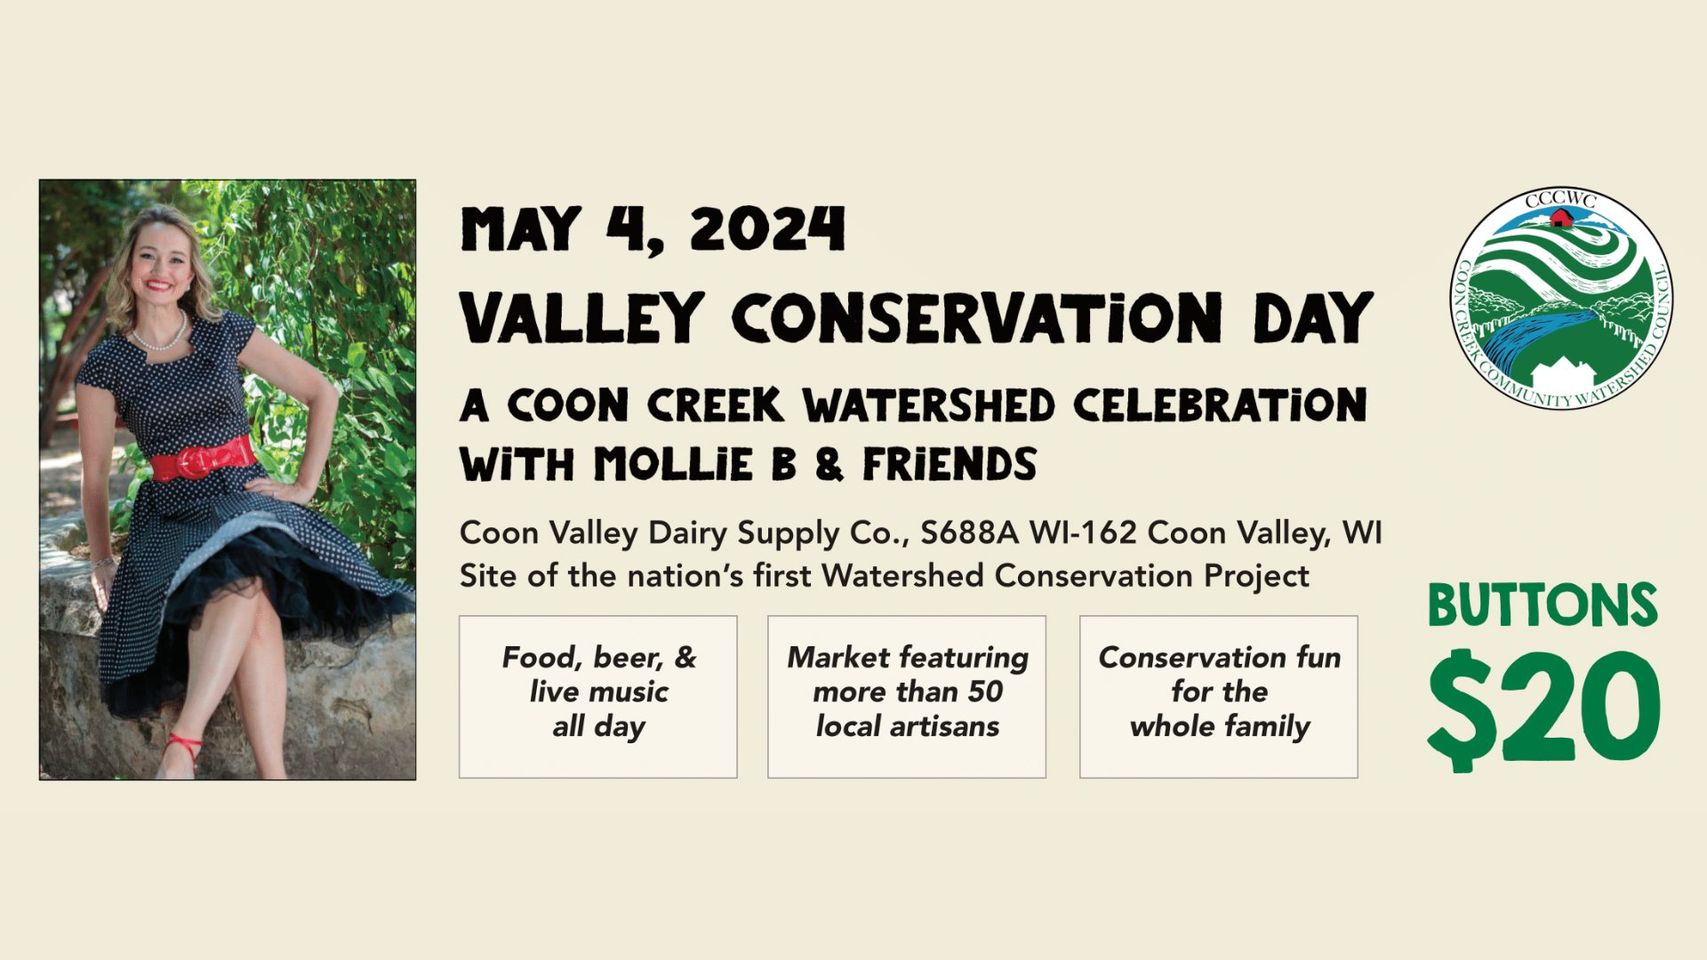 Flier for Valley Conservation Day